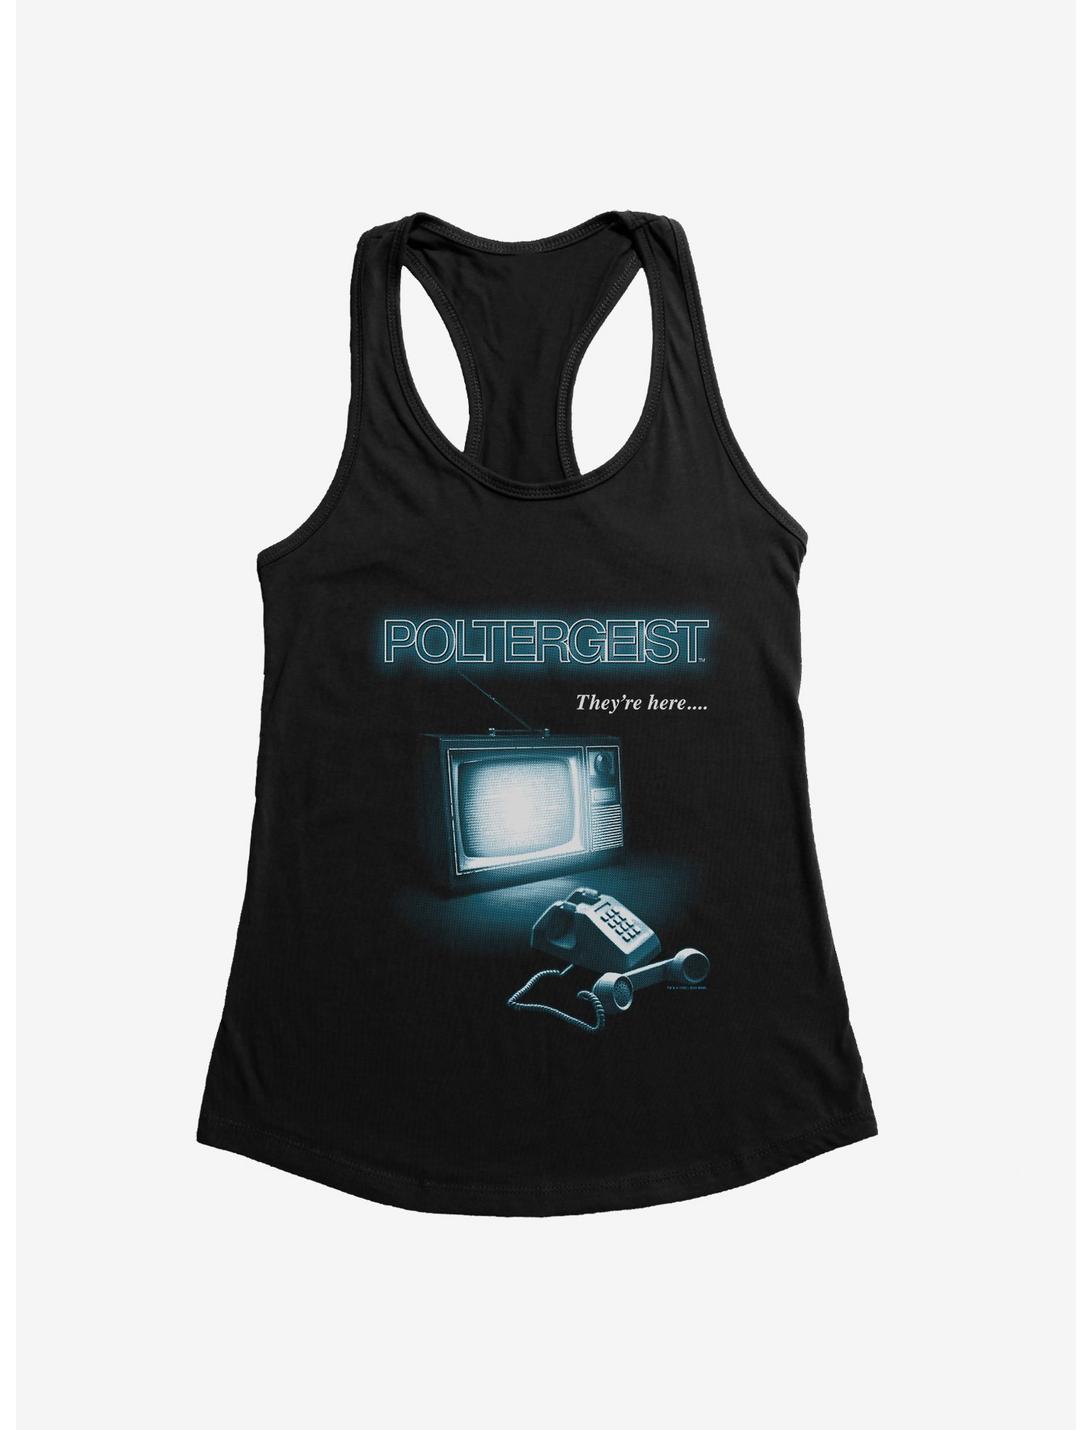 Poltergeist They're Here? Girls Tank, BLACK, hi-res